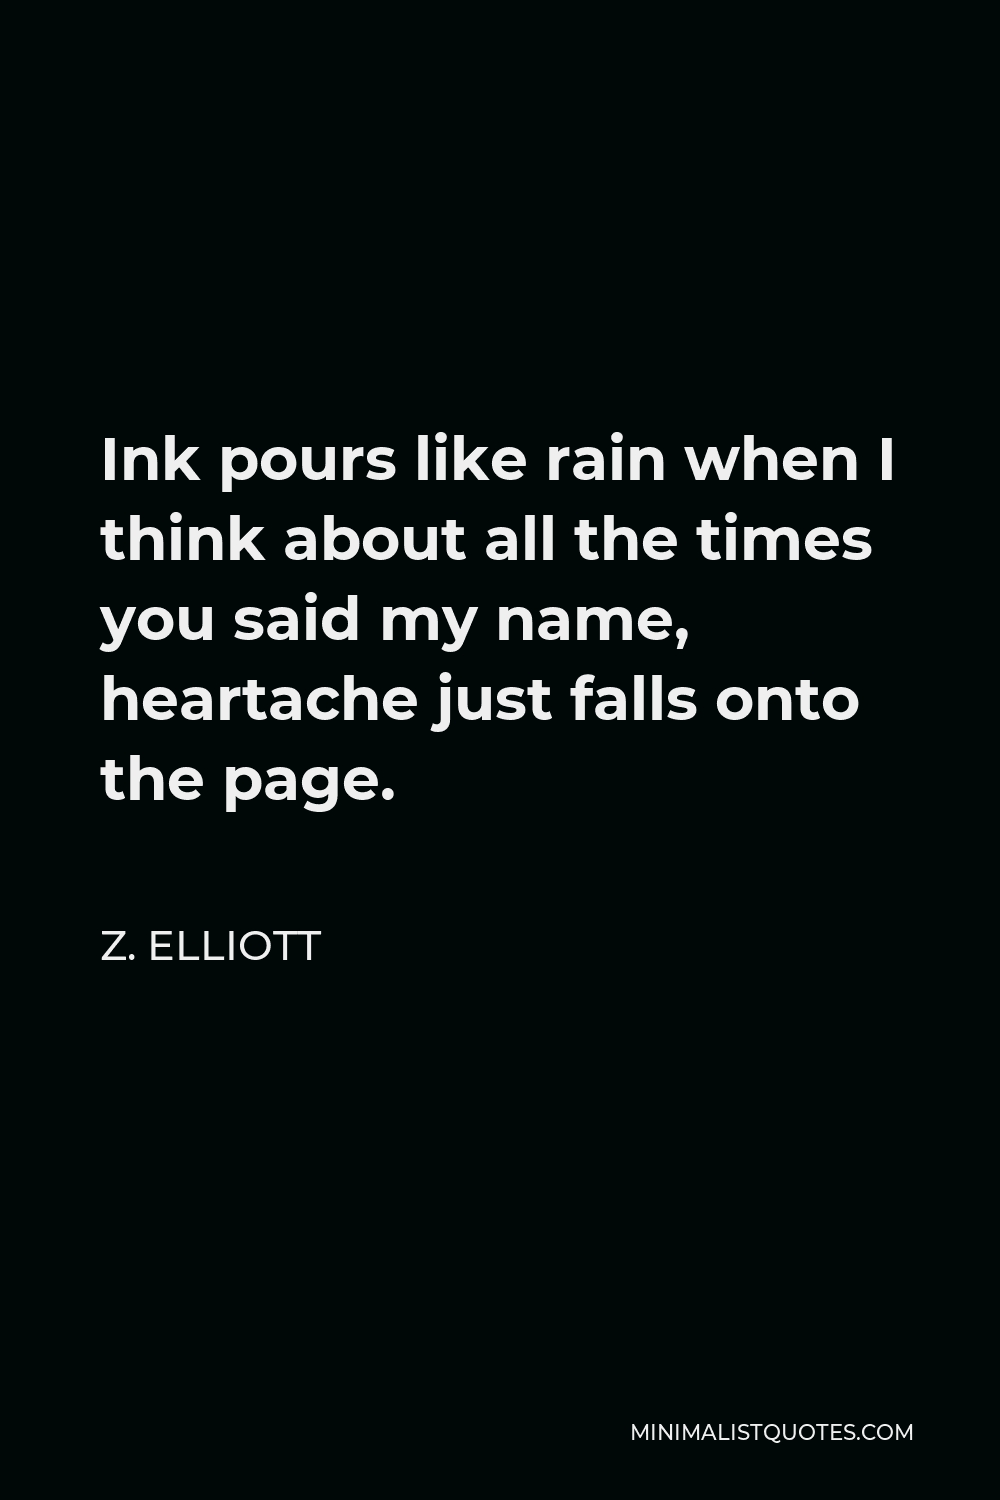 Z. Elliott Quote - Ink pours like rain when I think about all the times you said my name, heartache just falls onto the page.